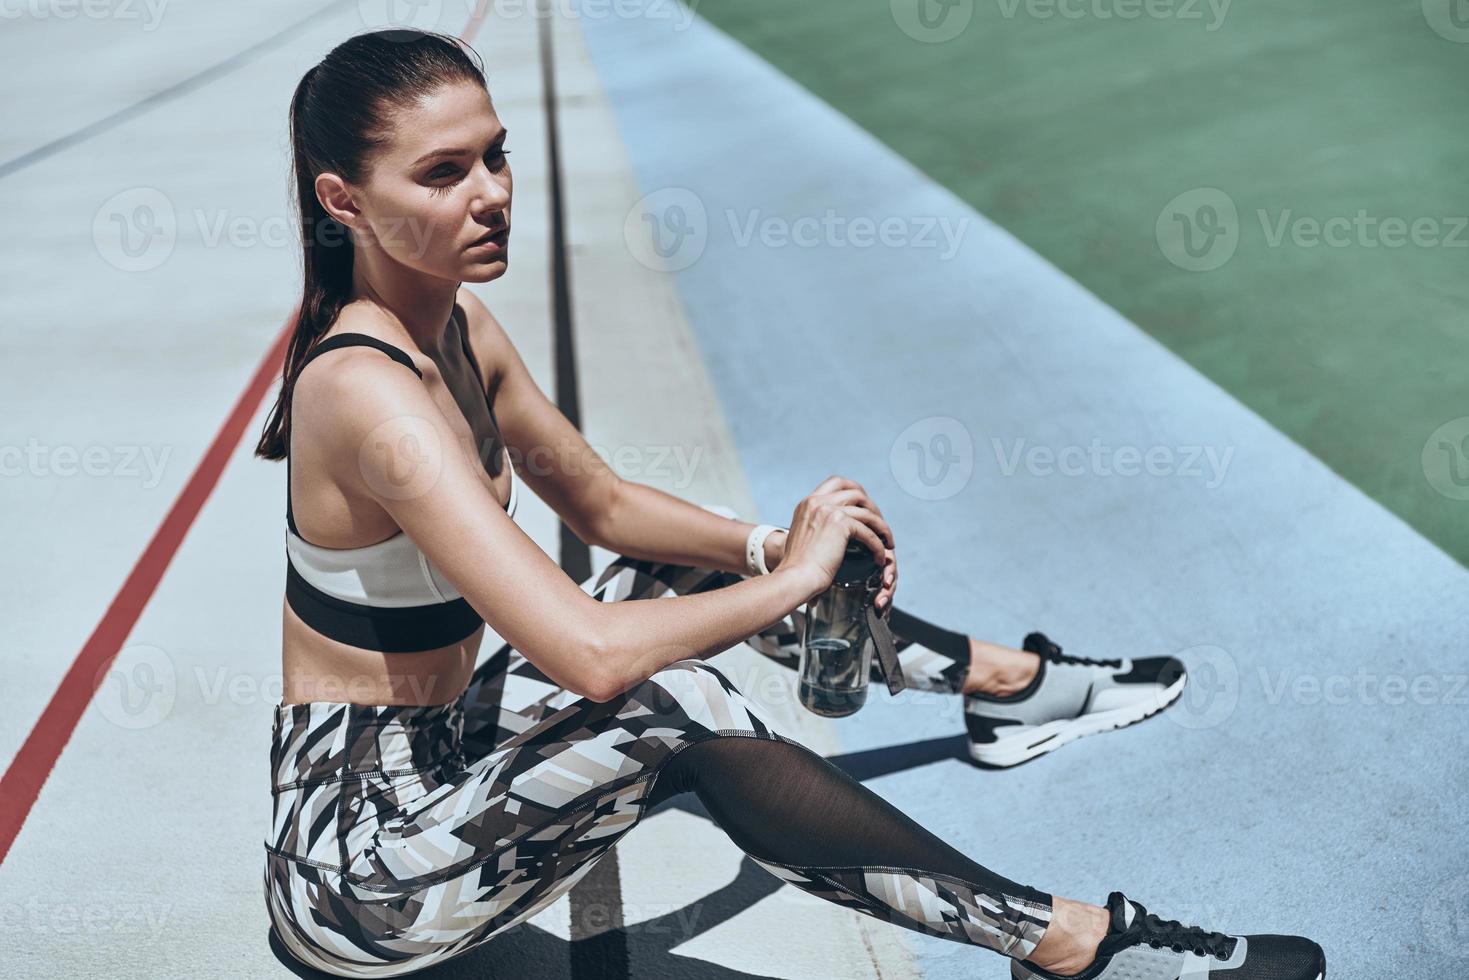 After workout. Top view of beautiful young woman in sports clothing relaxing and looking away while sitting on the running track outdoors photo